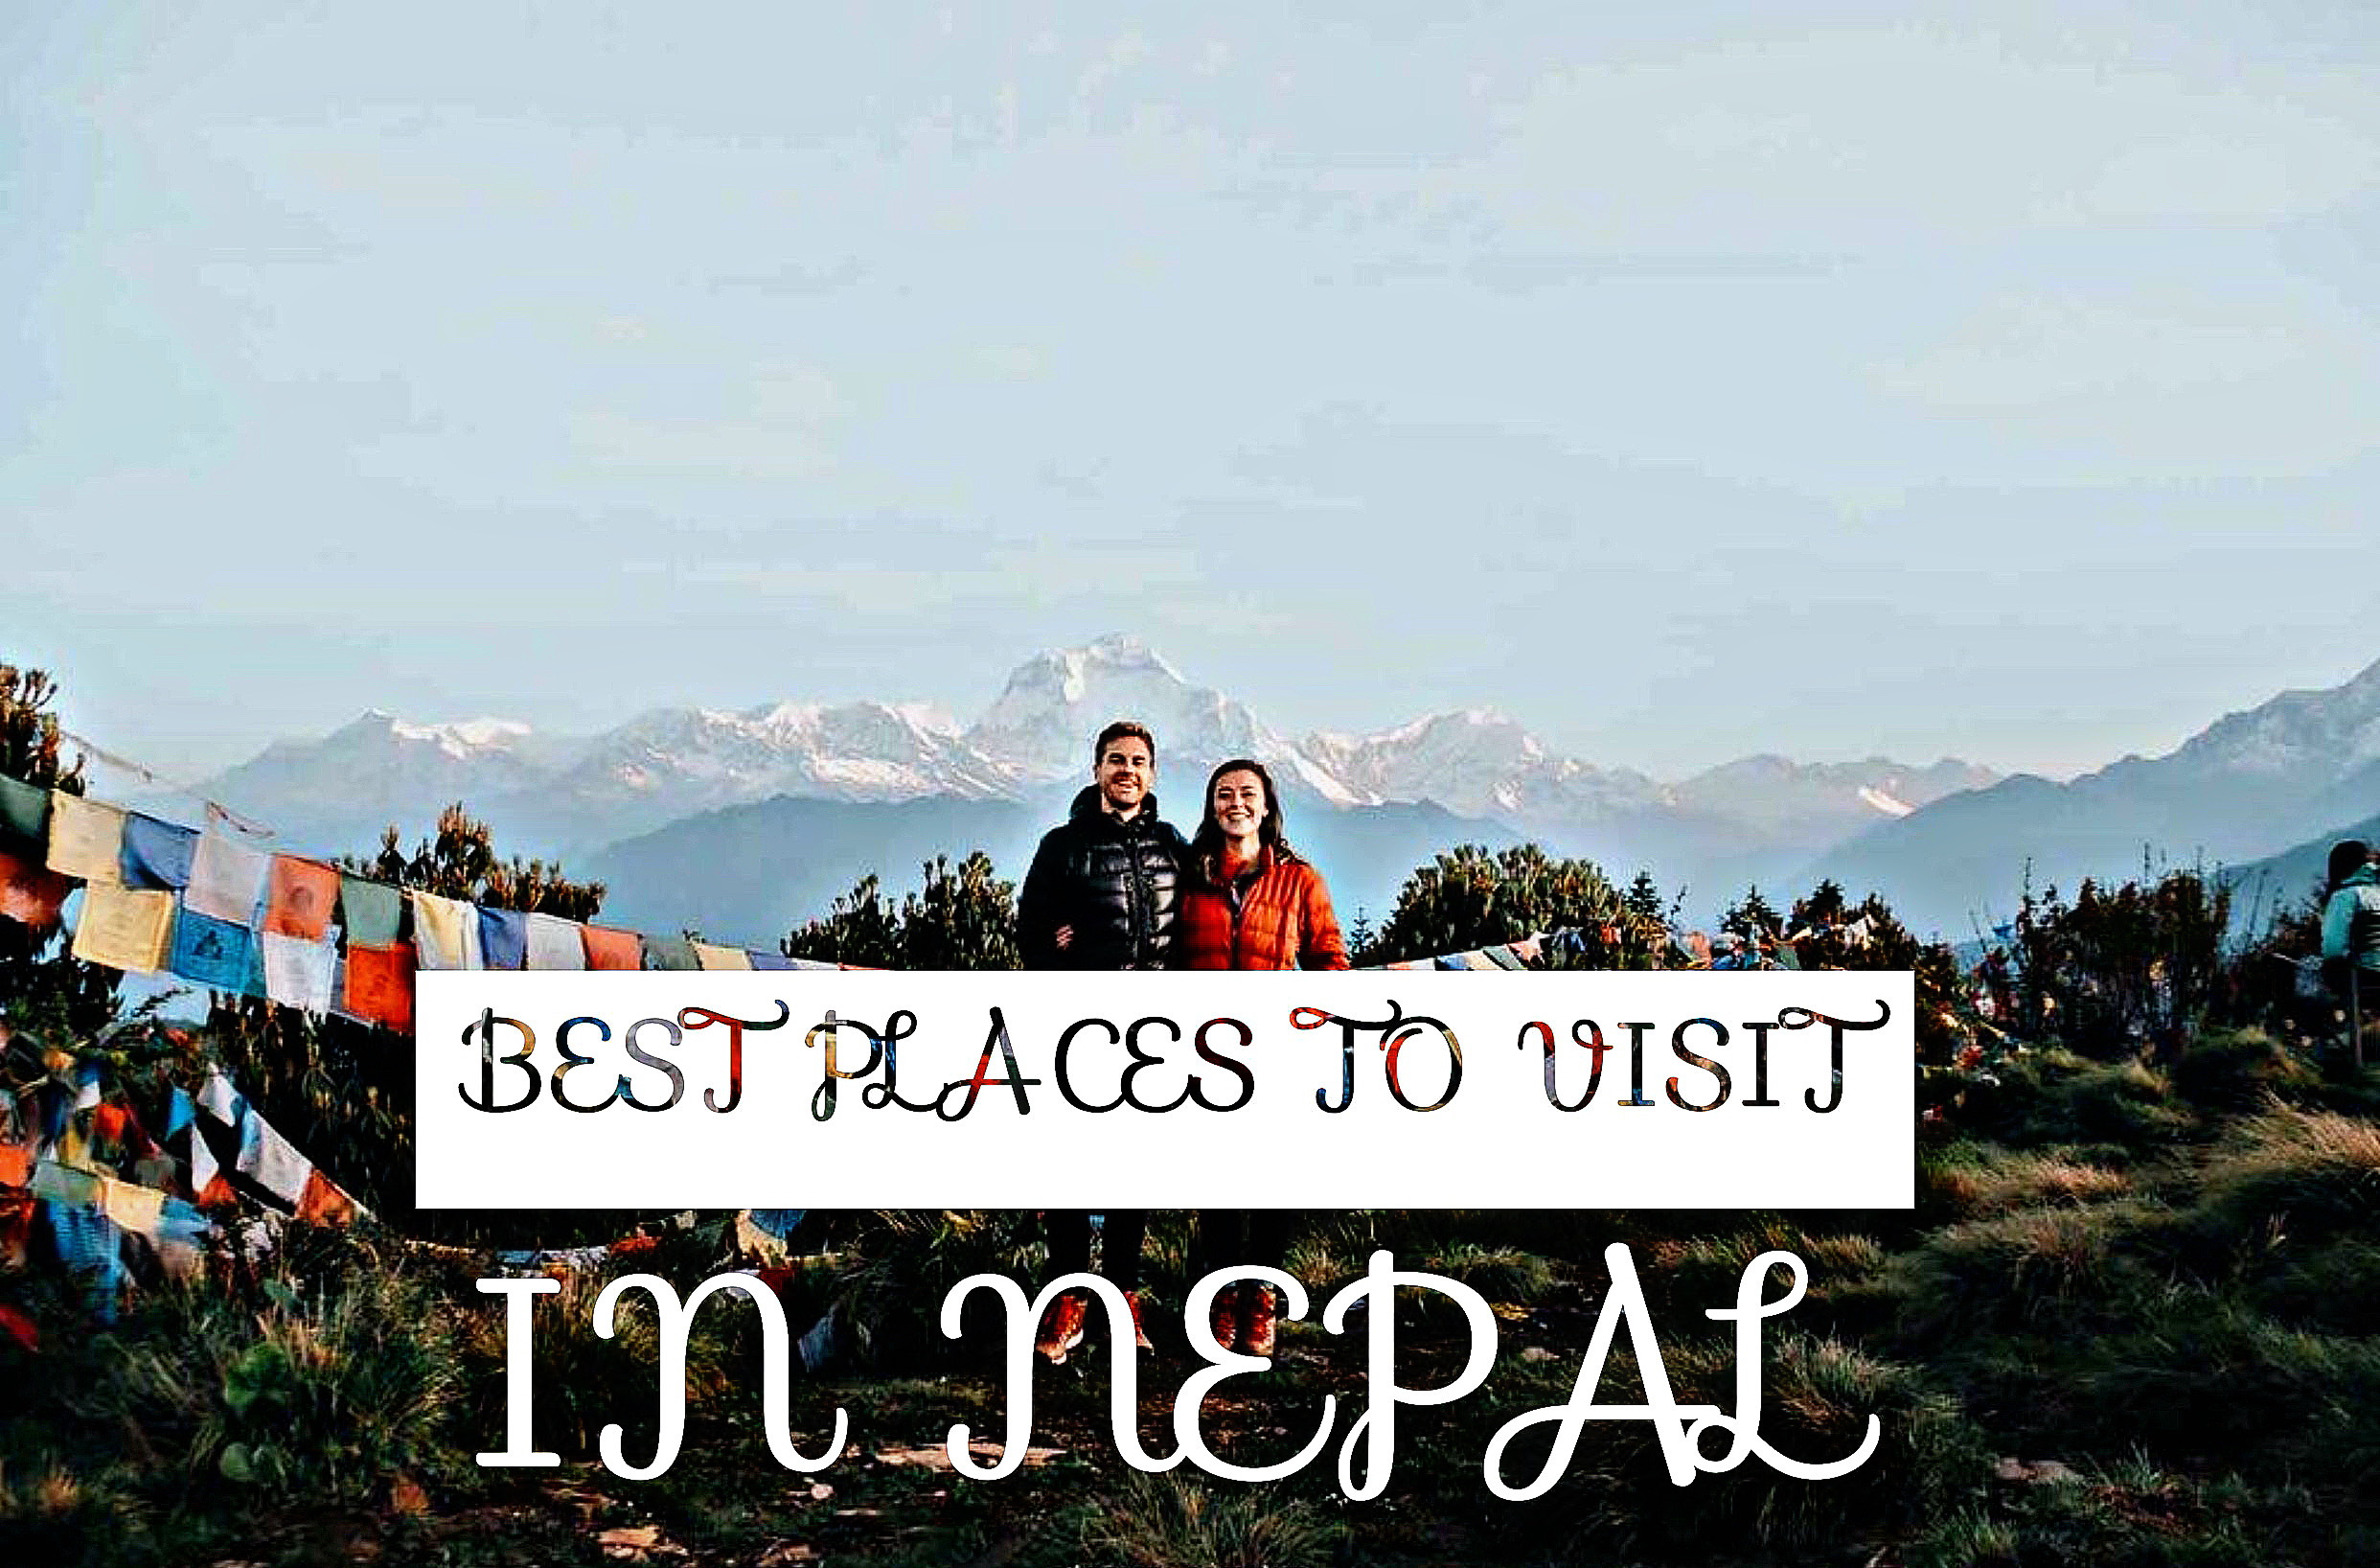 About Nepal and The 5 Best Places To Visit In Nepal